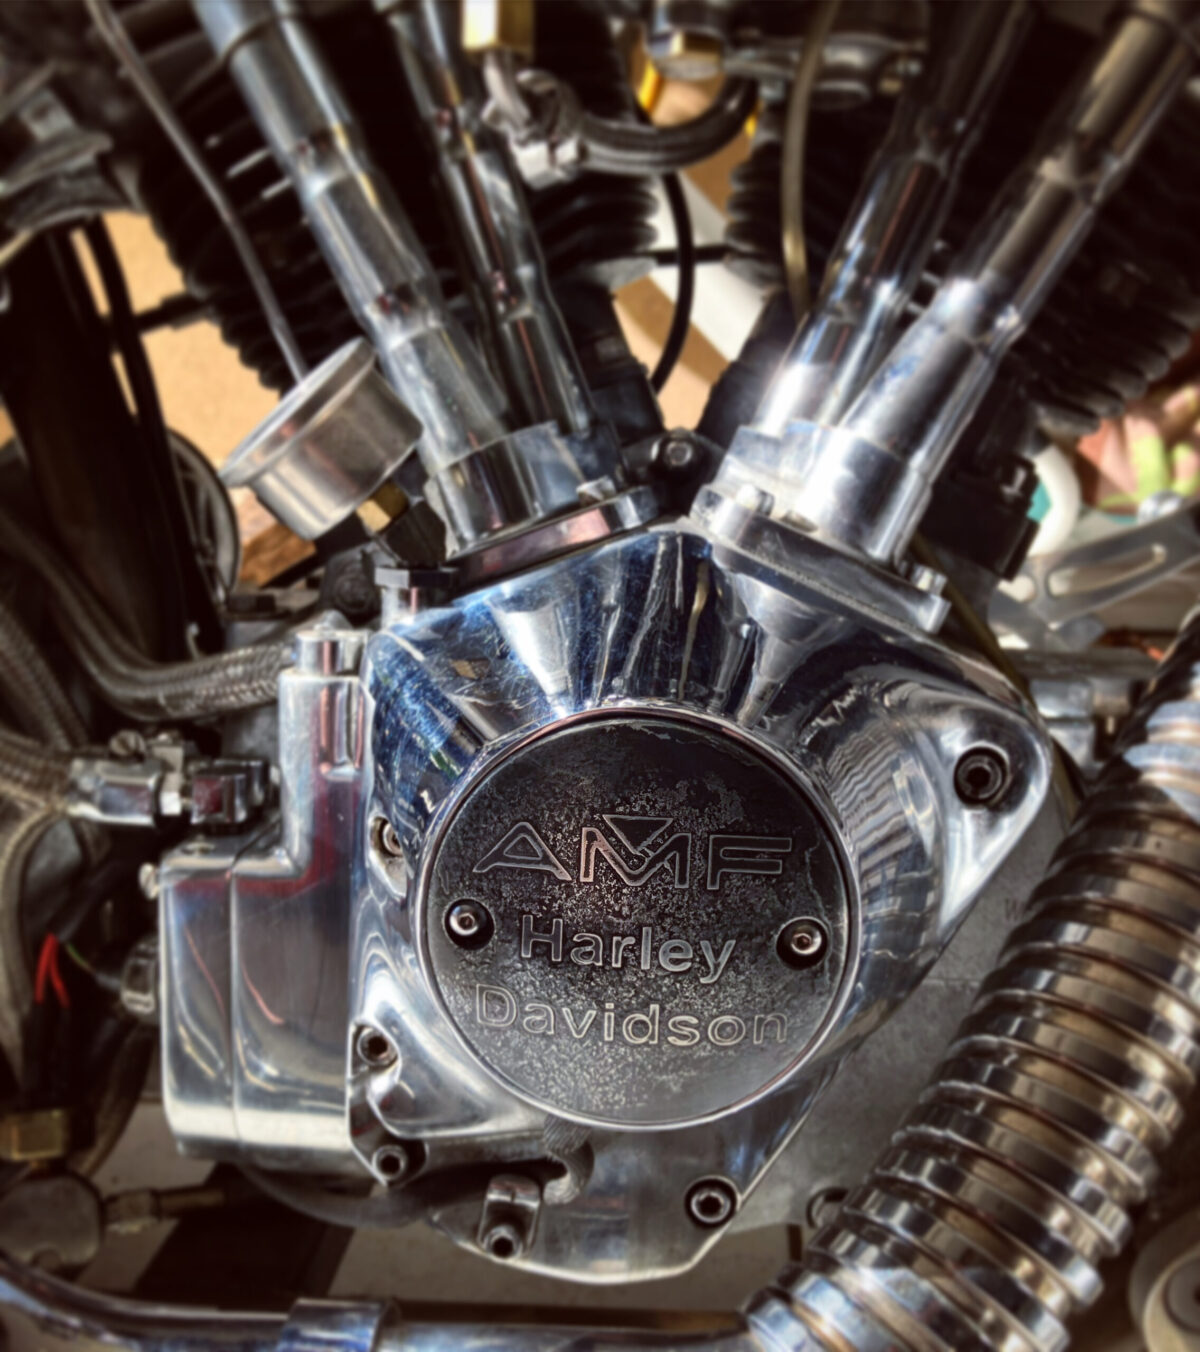 Point Cover AMF Harley Davidson engraved - SCHOOL OF COOL